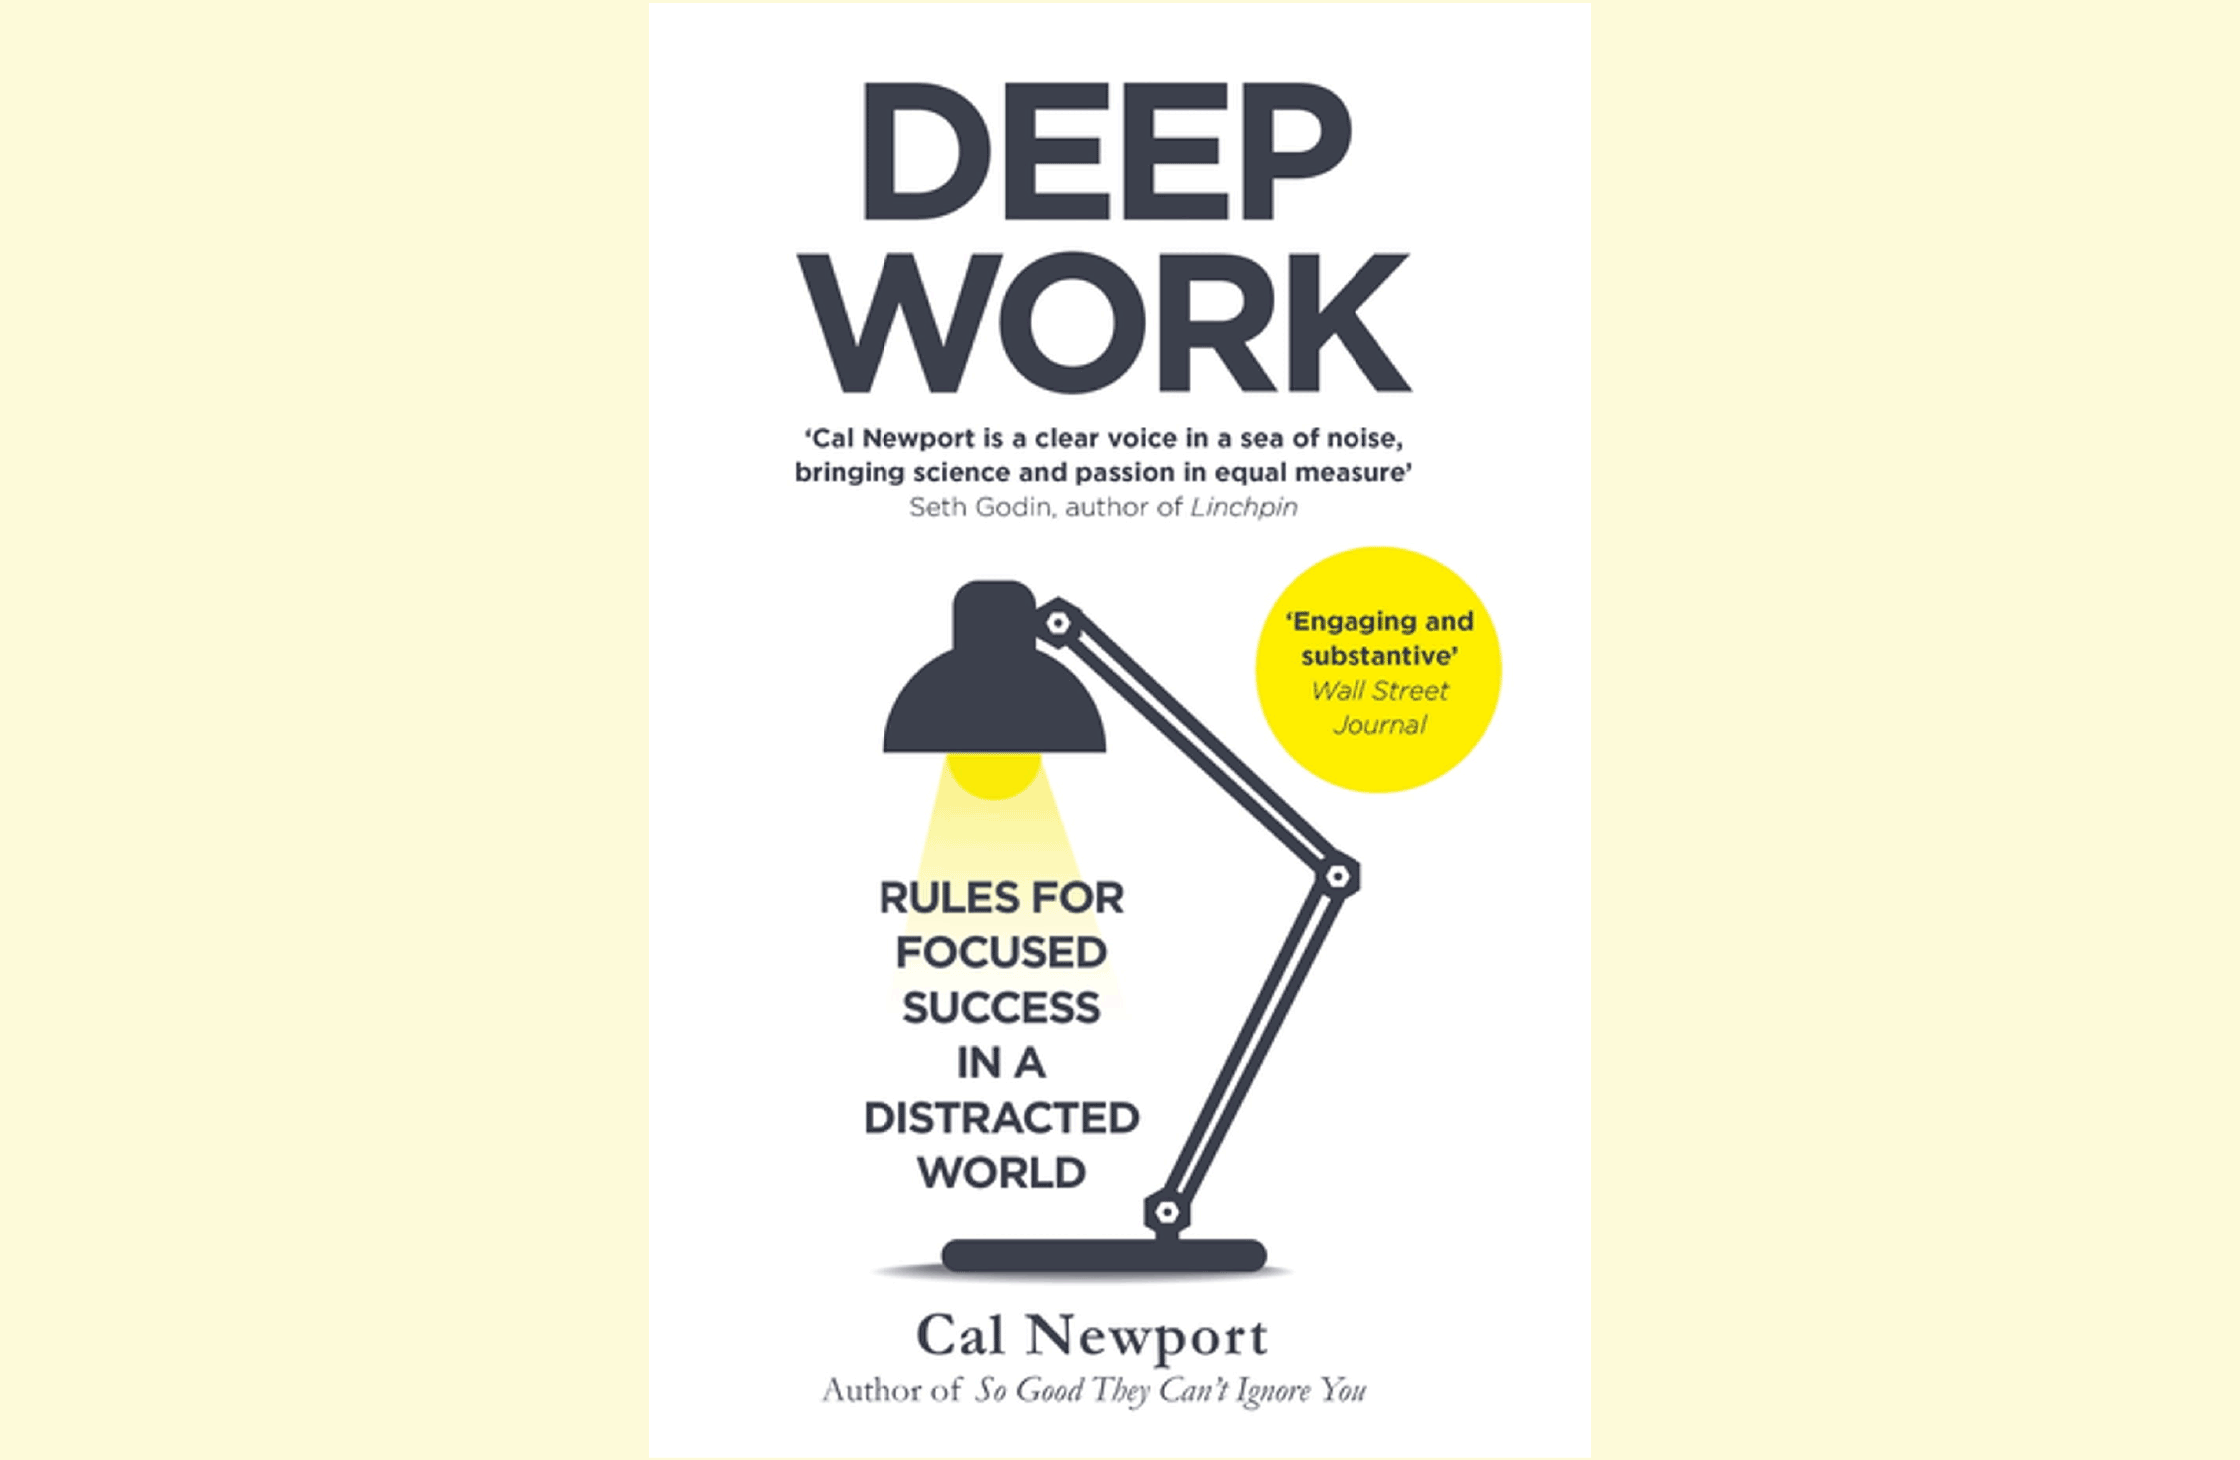 Summary: Deep Work: Rules for Focused Success in a Distracted World by Cal Newport